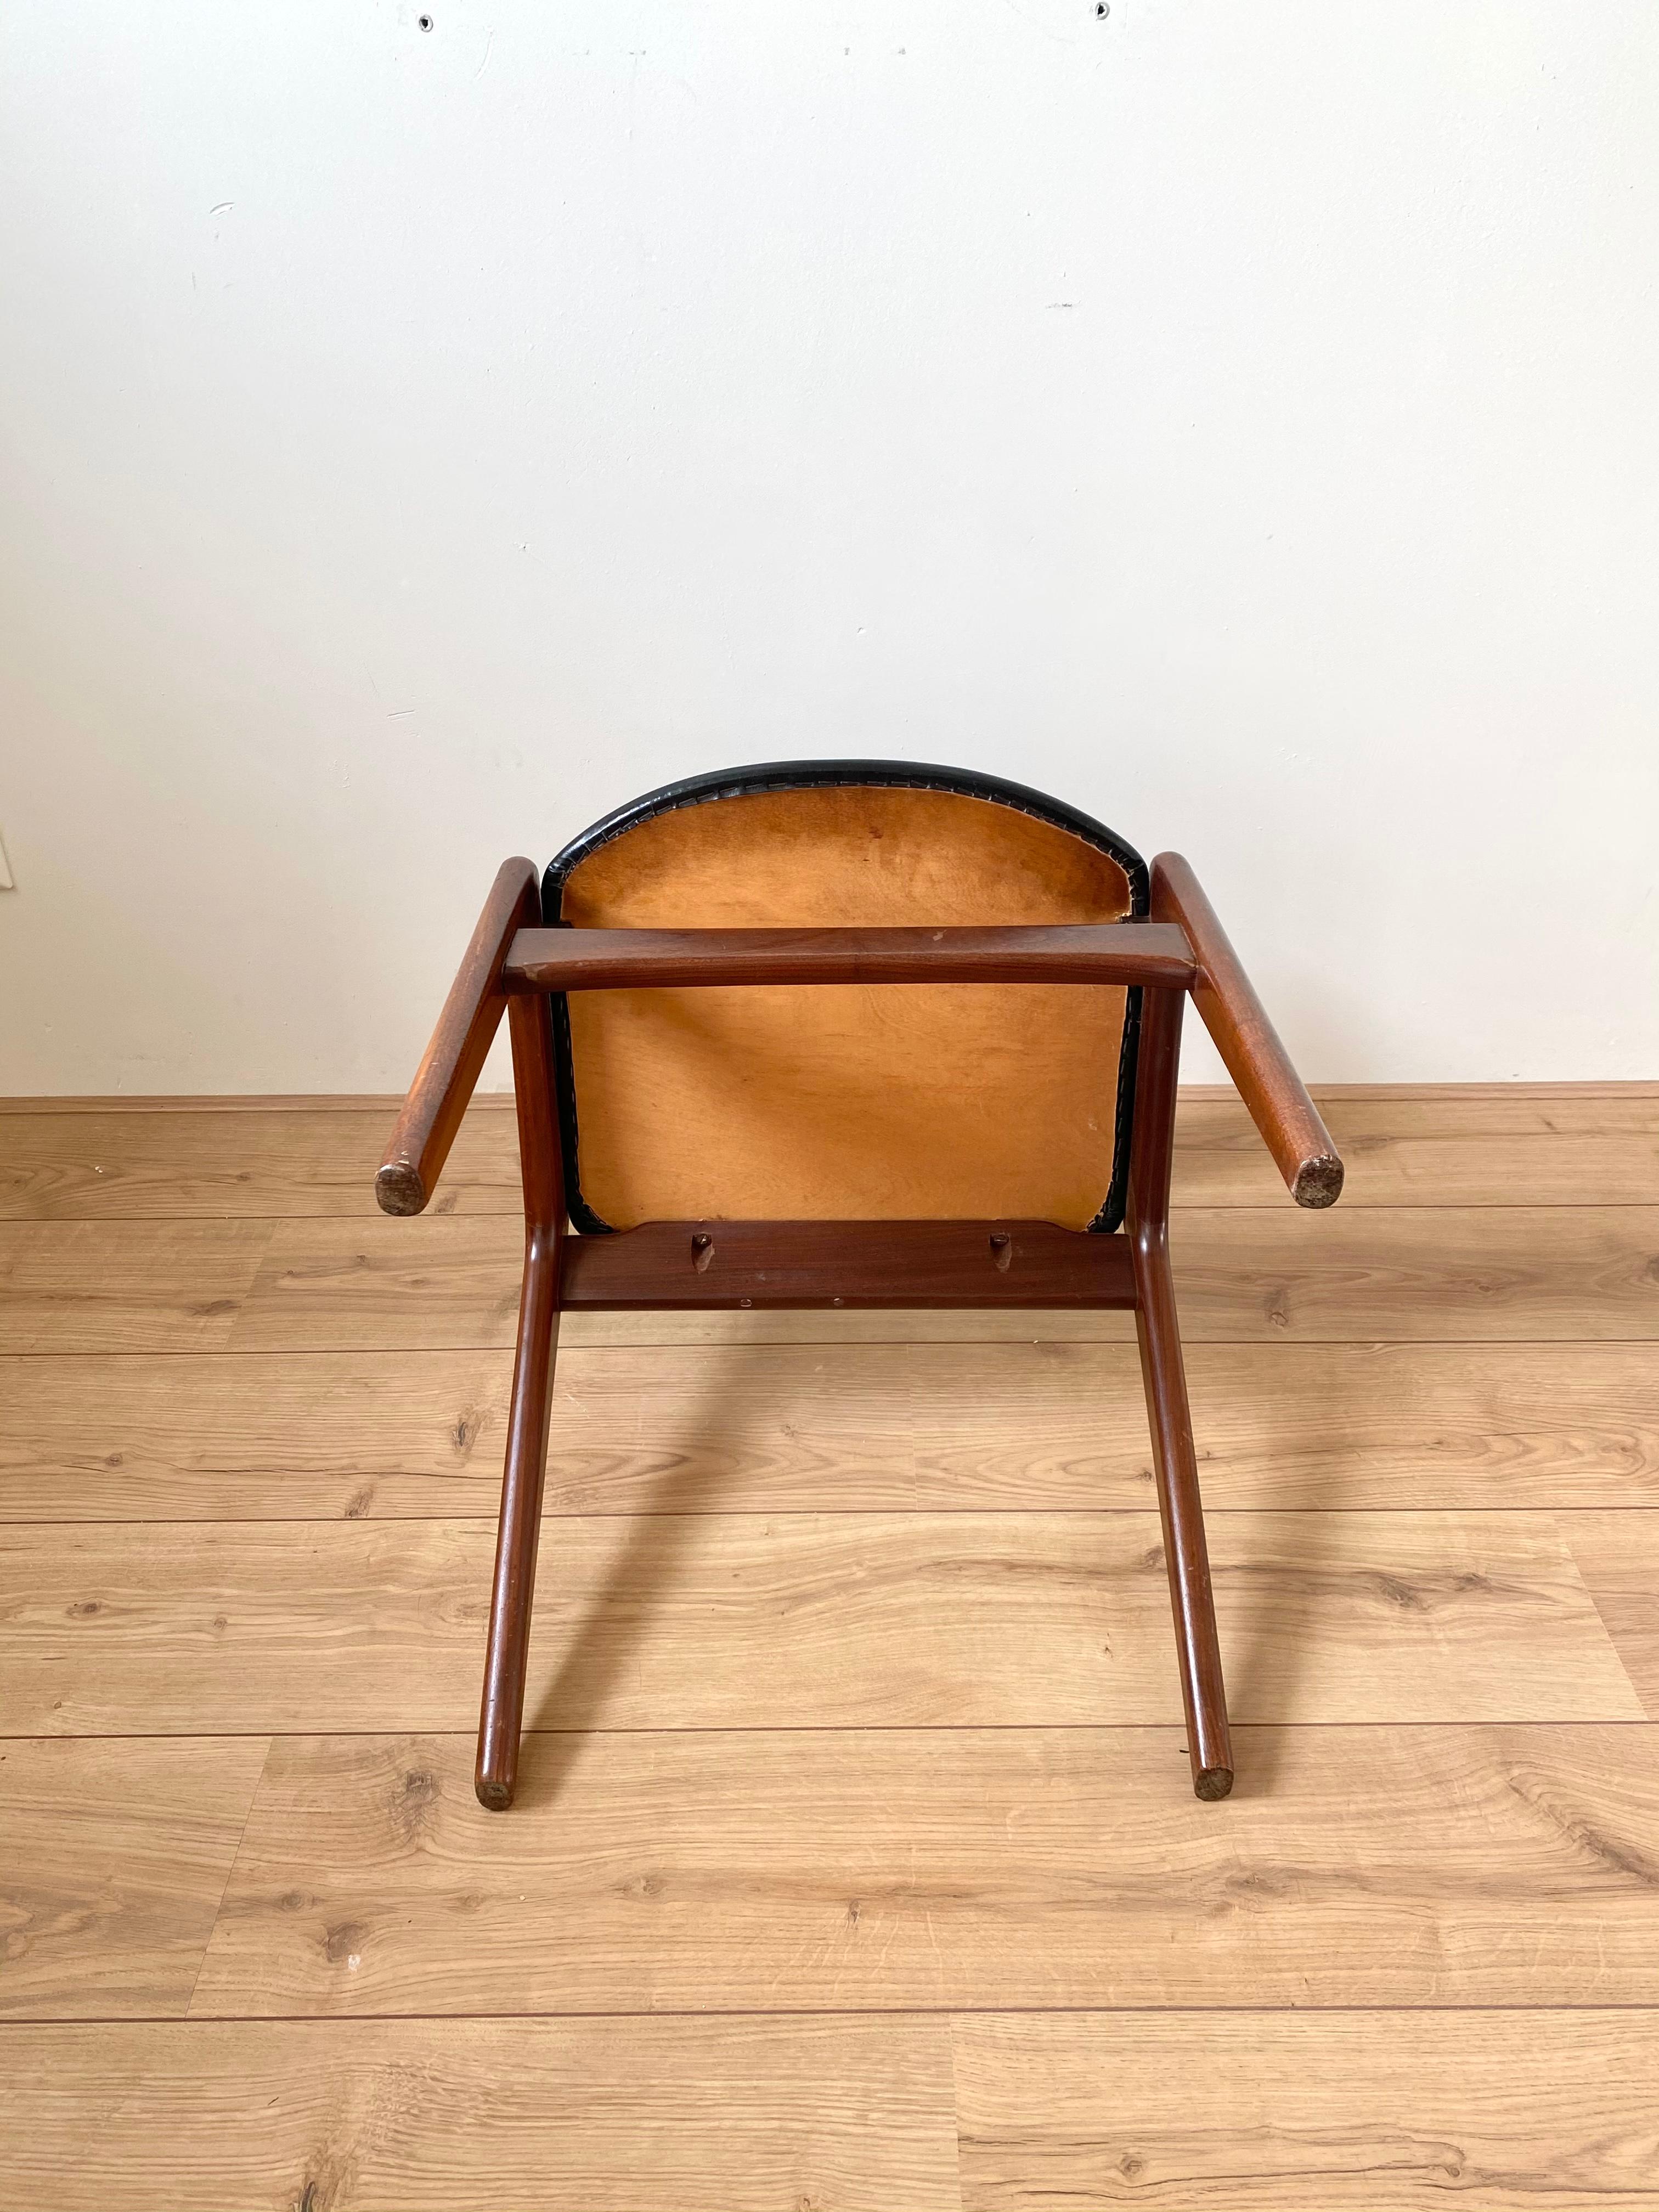 Midcentury Danish Design Dining Chairs By T.H. Harlev for Farstrup Mobler. For Sale 4